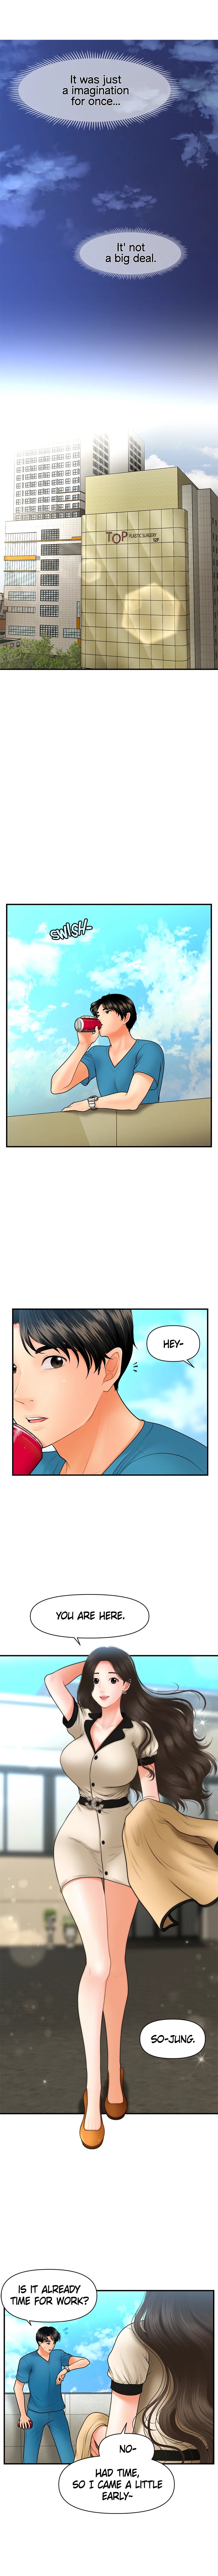 You’re so Handsome - Chapter 44 Page 8